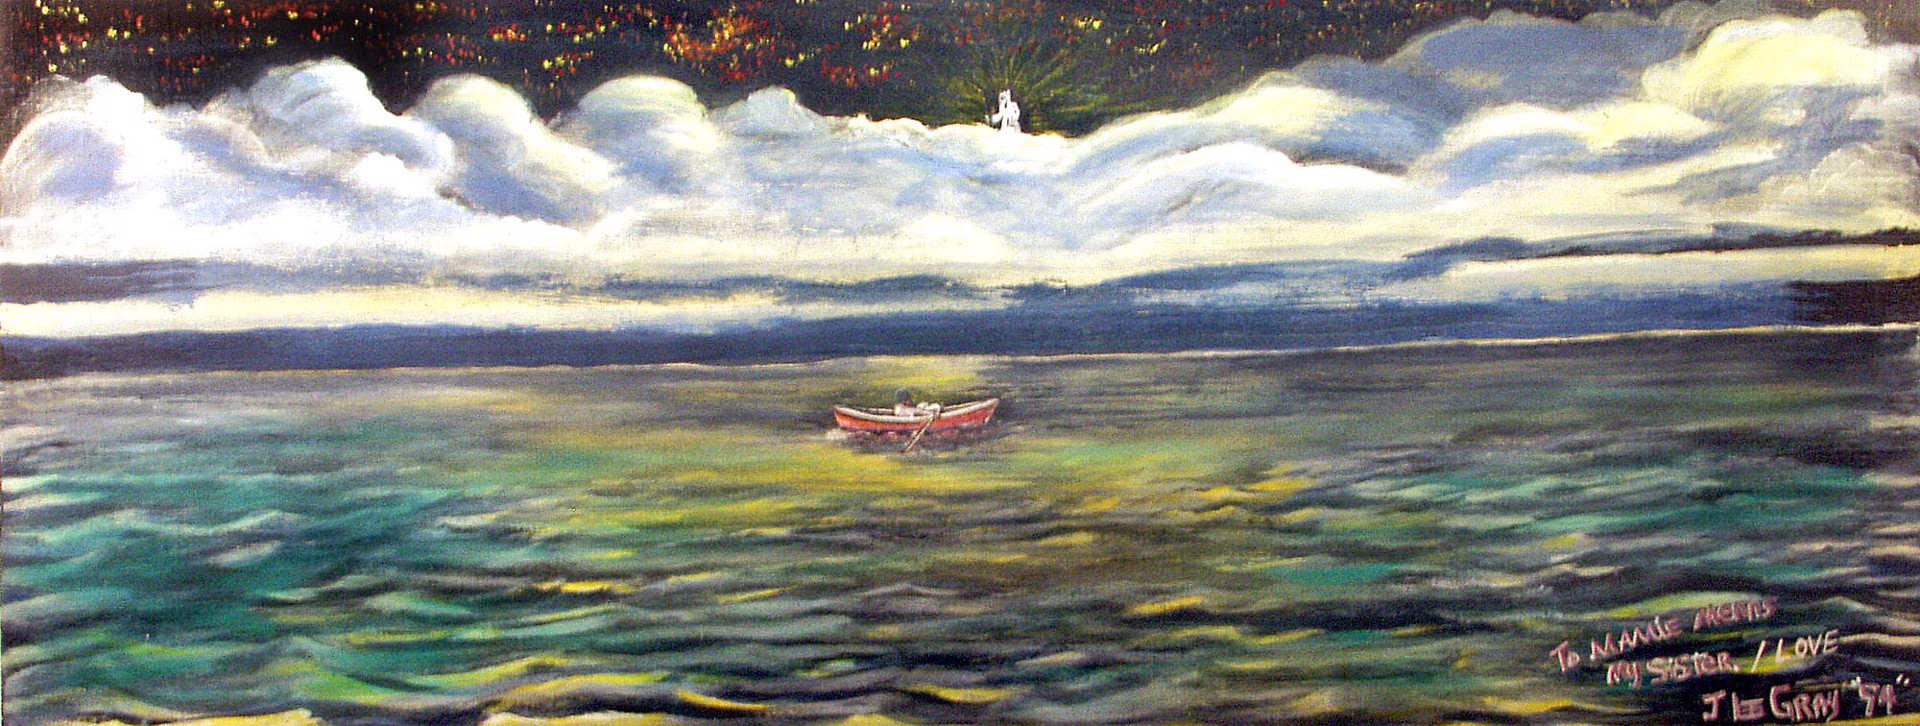 My Boat So Small by Johnnie Lee Gray